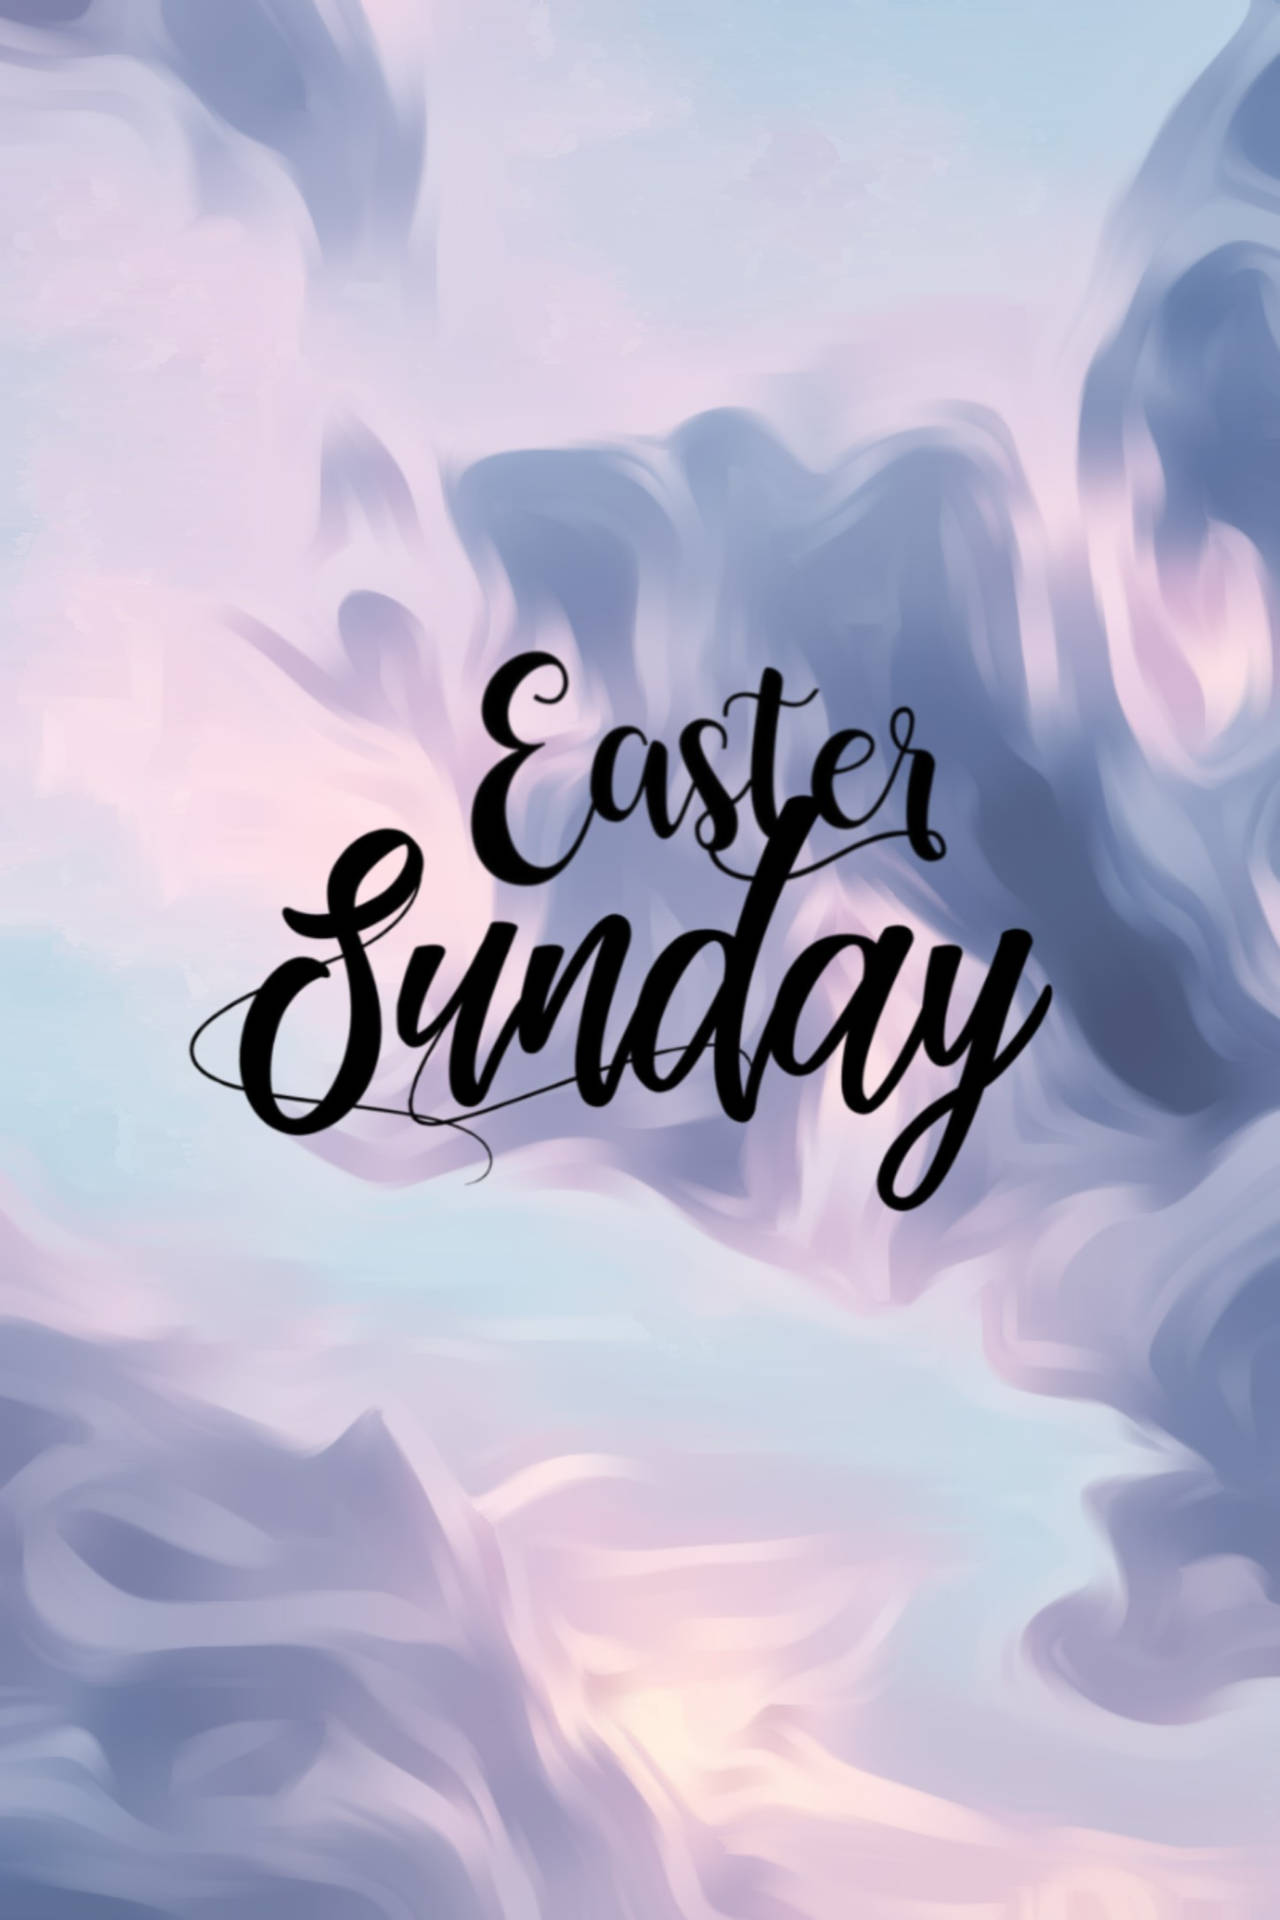 Free Aesthetic Easter Wallpaper Downloads, Aesthetic Easter Wallpaper for FREE